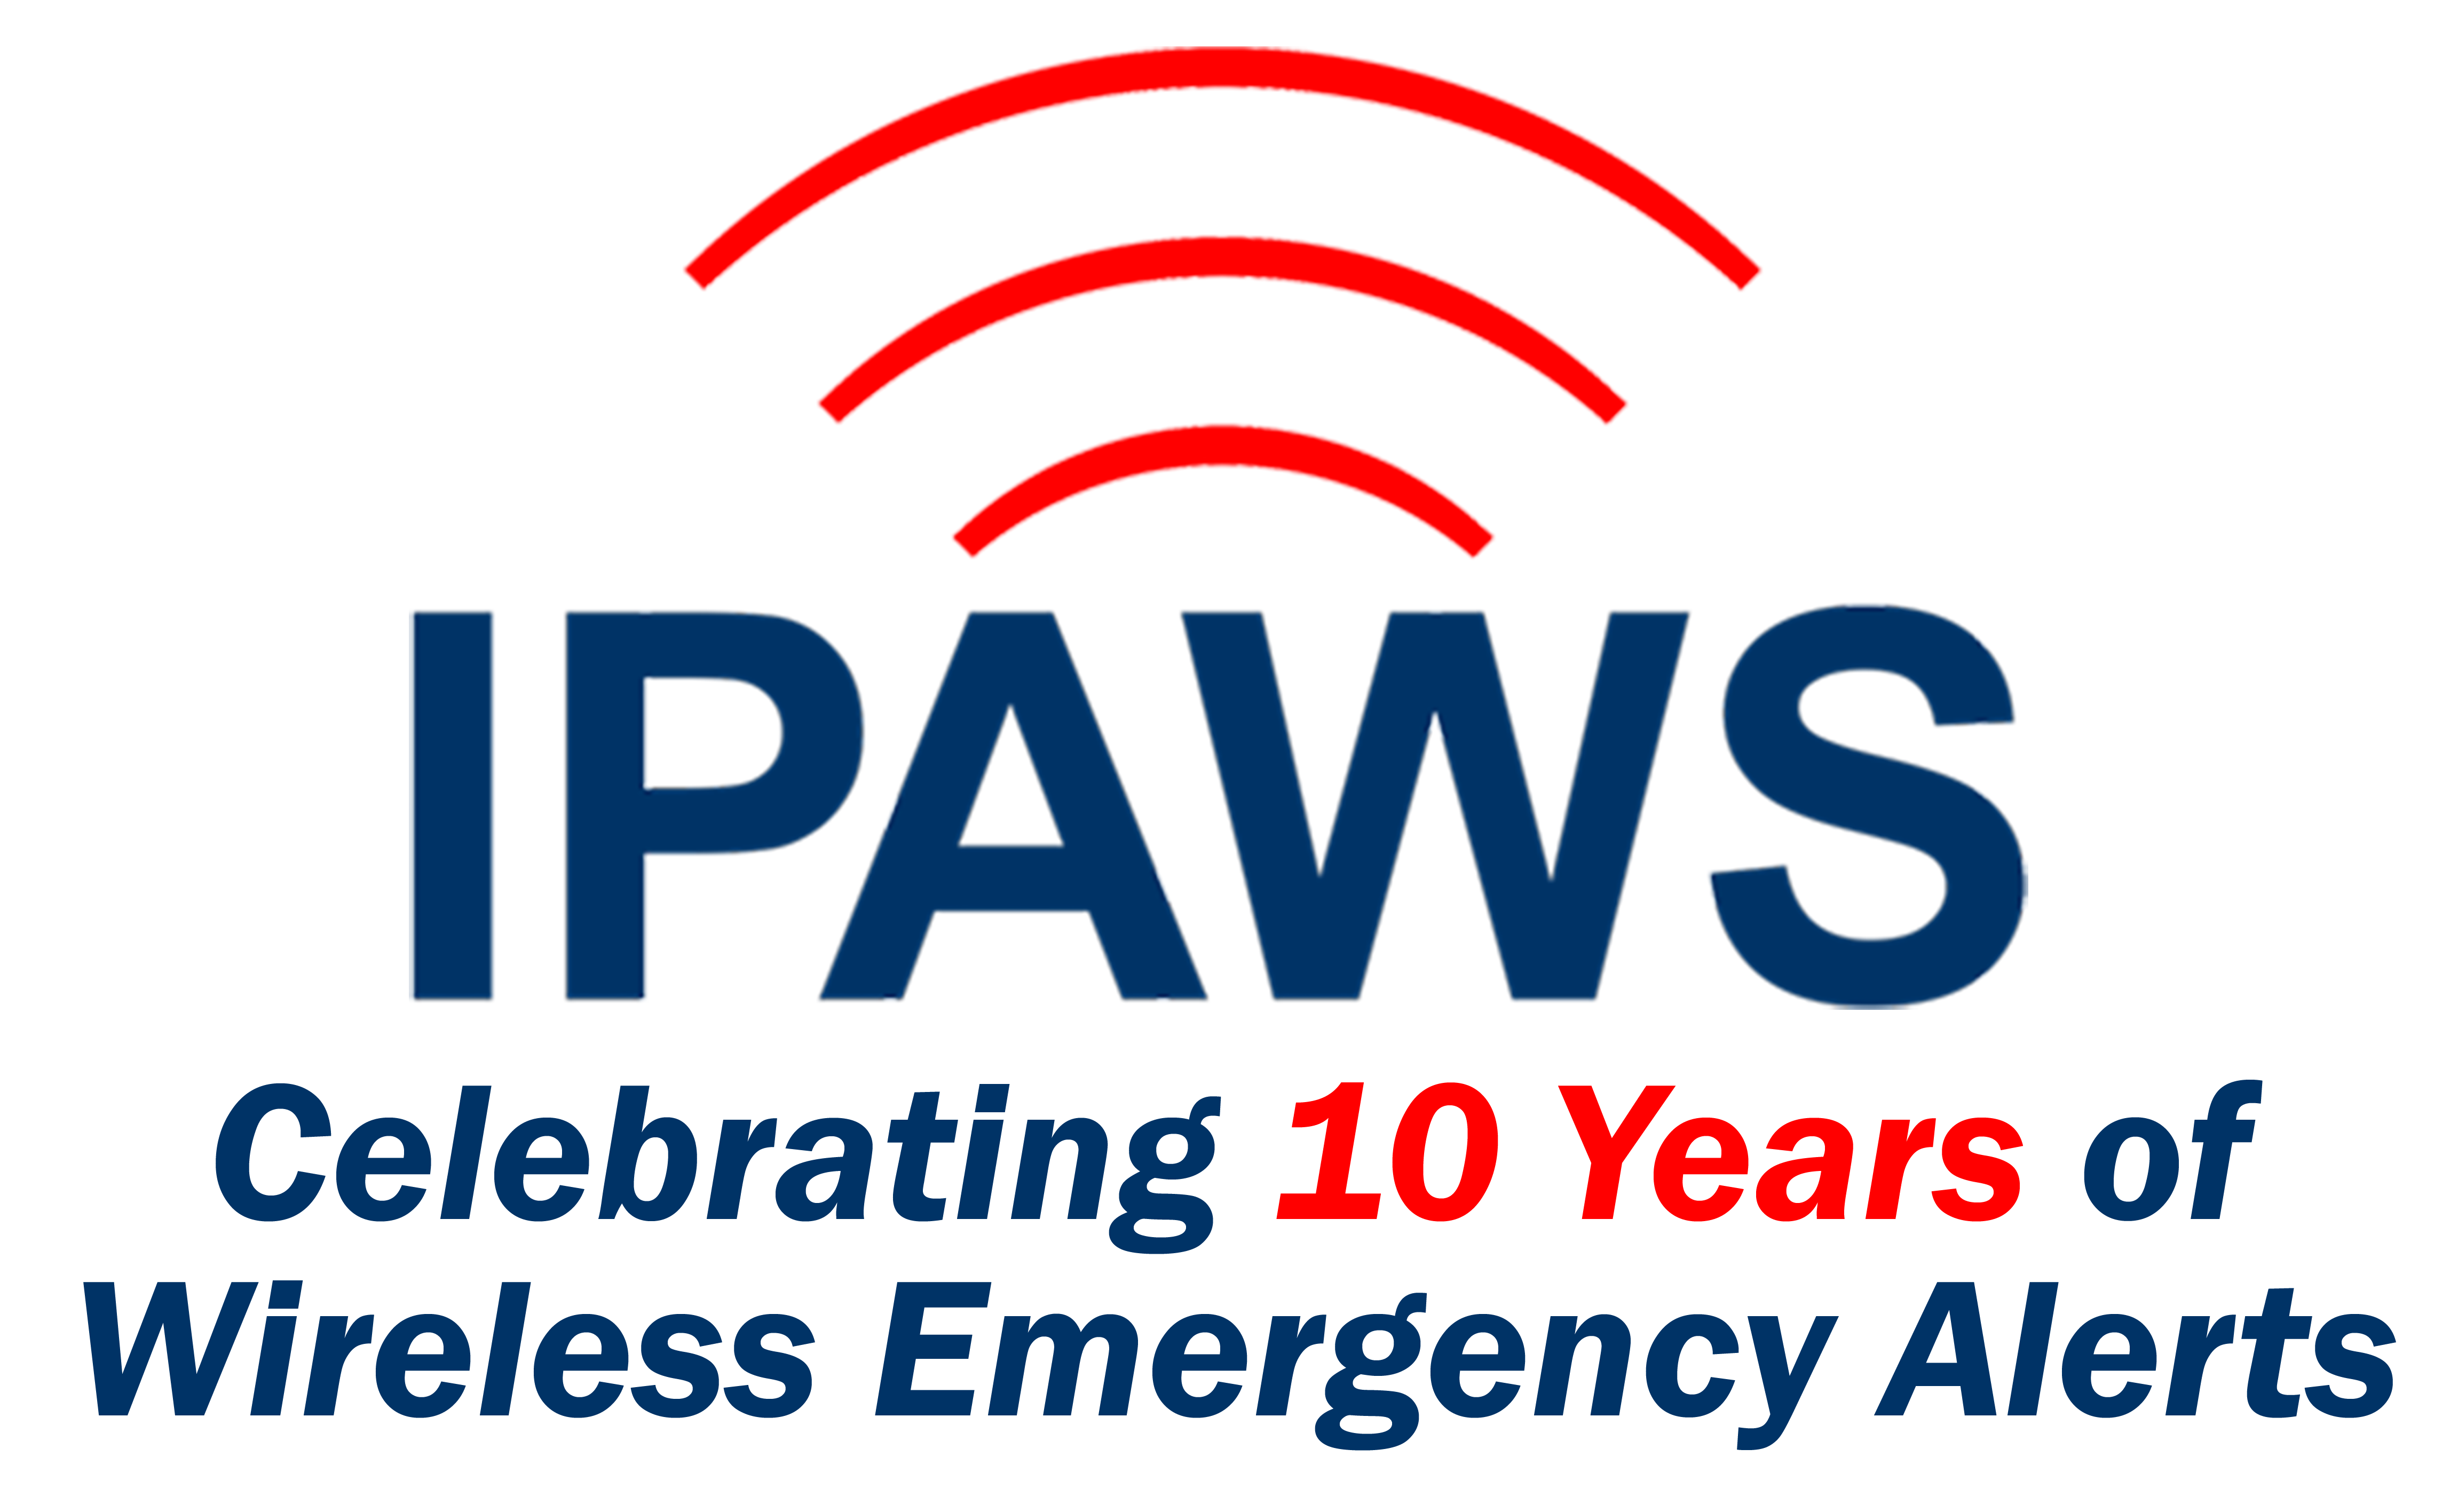 Graphic for IPAWS Celebrating 10 Years of Wireless Emergency Alerts